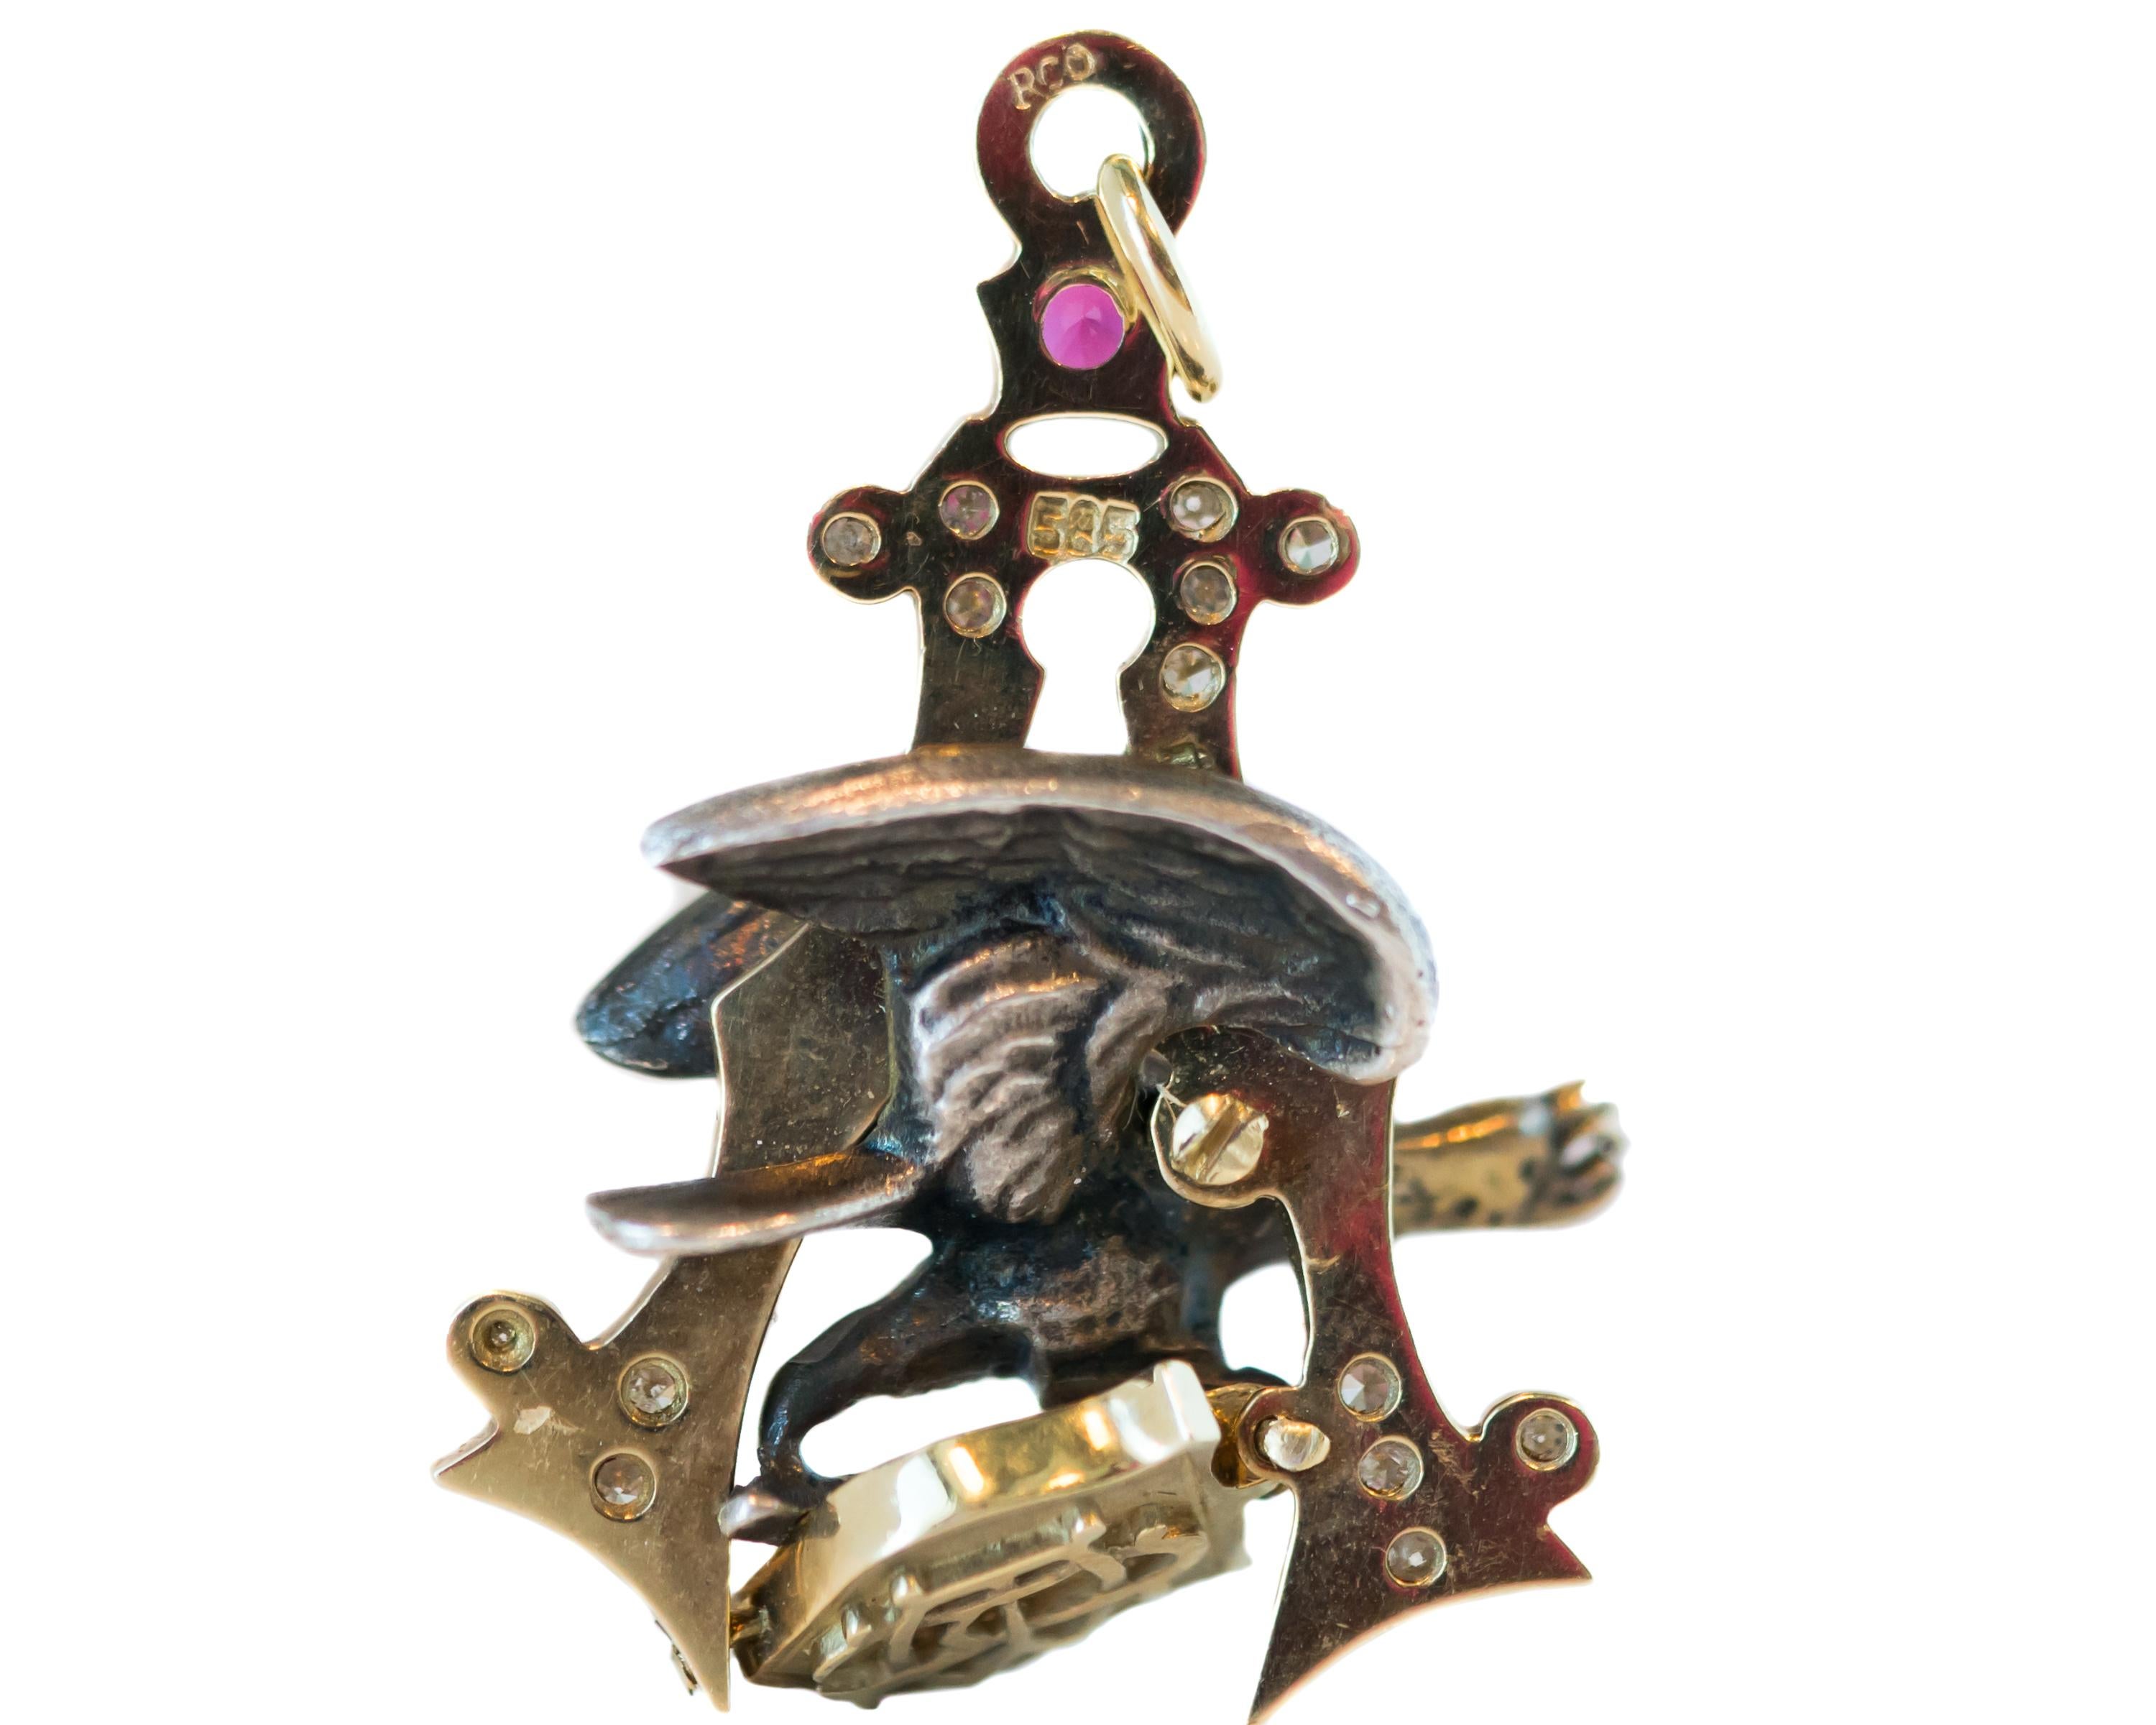 1950s Retro Eagle, American Flag Pendant - 14 Karat Yellow Gold, Sterling Silver, Diamonds, Red Gemstones

Features:
14 Karat Yellow Gold Letter A Background
Sterling Silver Screaming Eagle with Outstretched Wings, Open Beak, Fanned Tail and